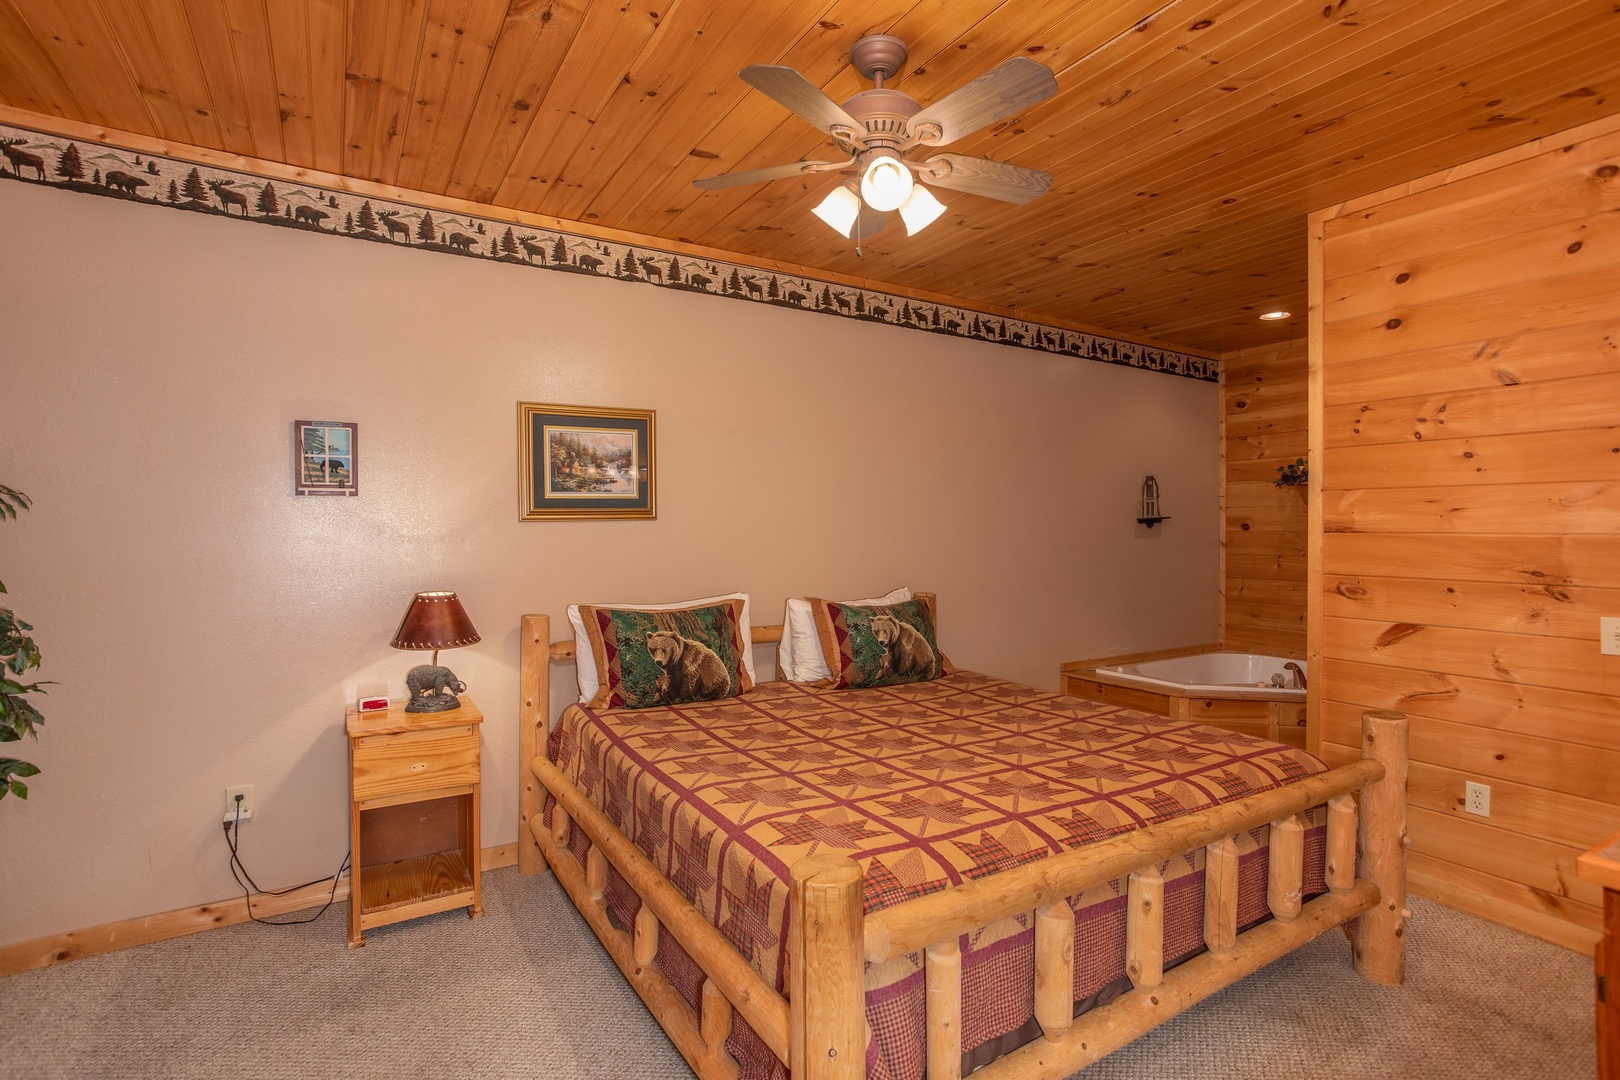 Bedroom with king-sized bed and jacuzzi at Bearly in the Mountains, a 5-bedroom cabin rental located in Pigeon Forge